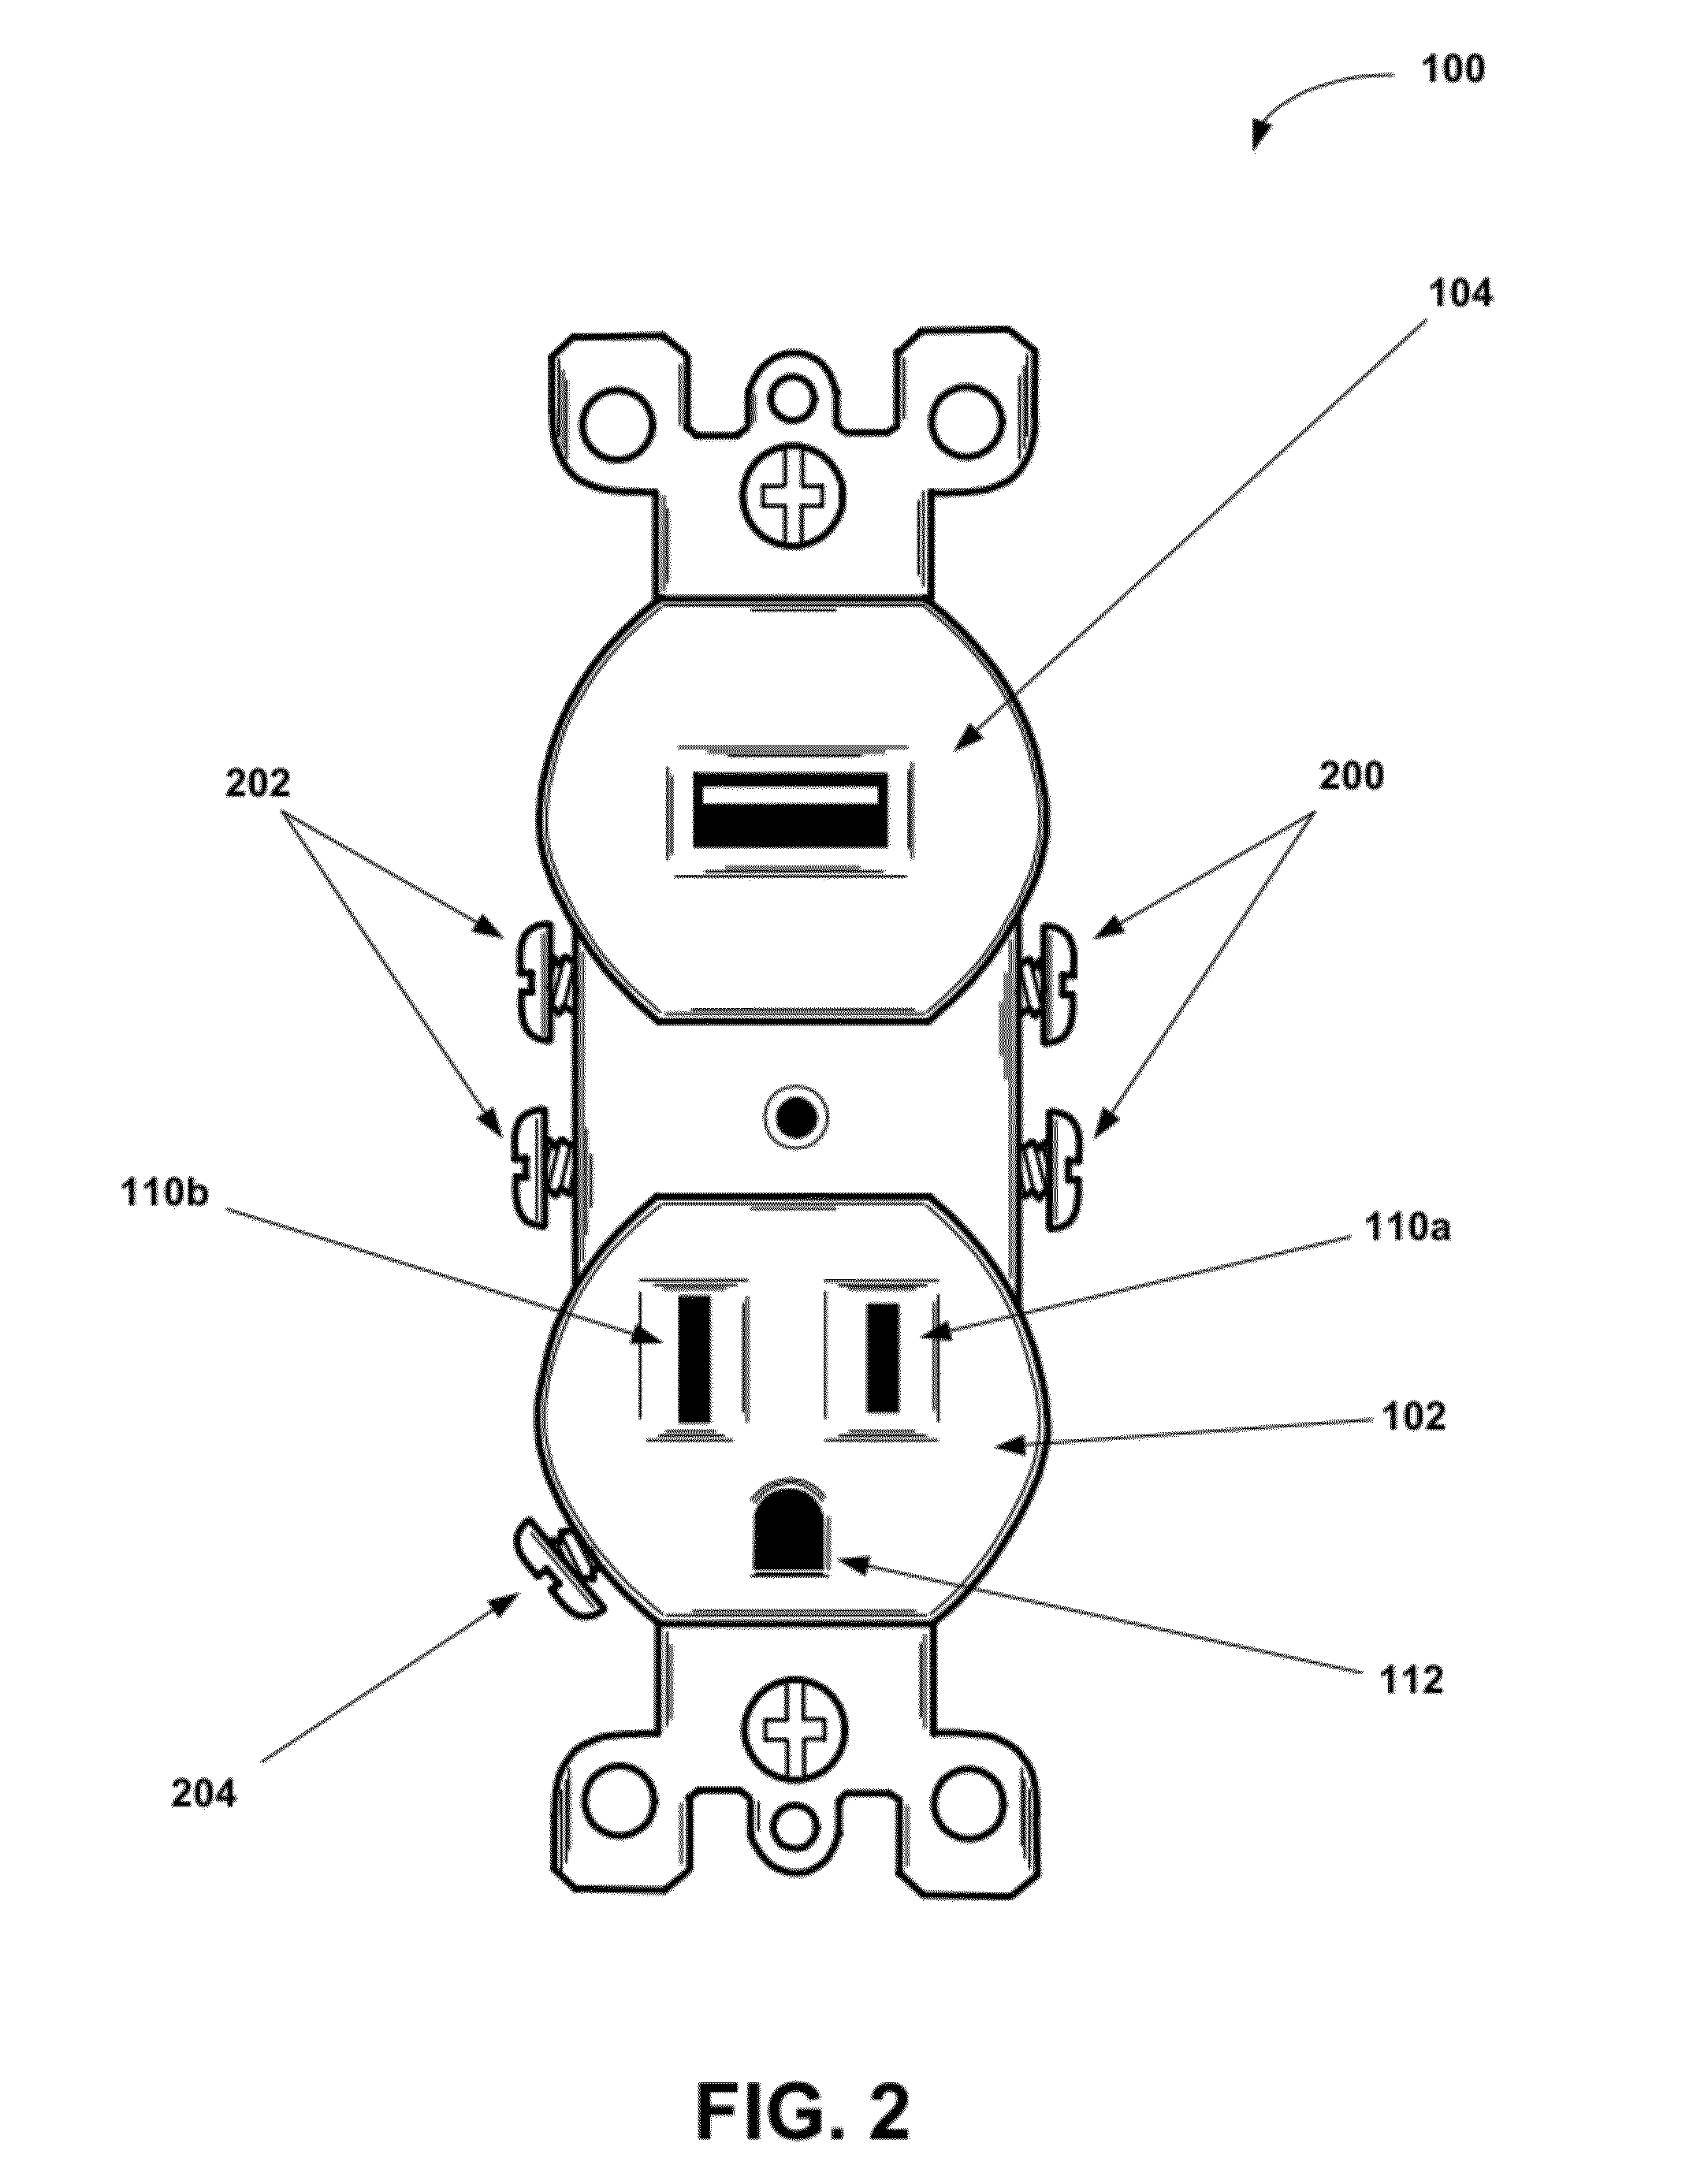 Wall mountable universal serial bus and alternating current power sourcing receptacle